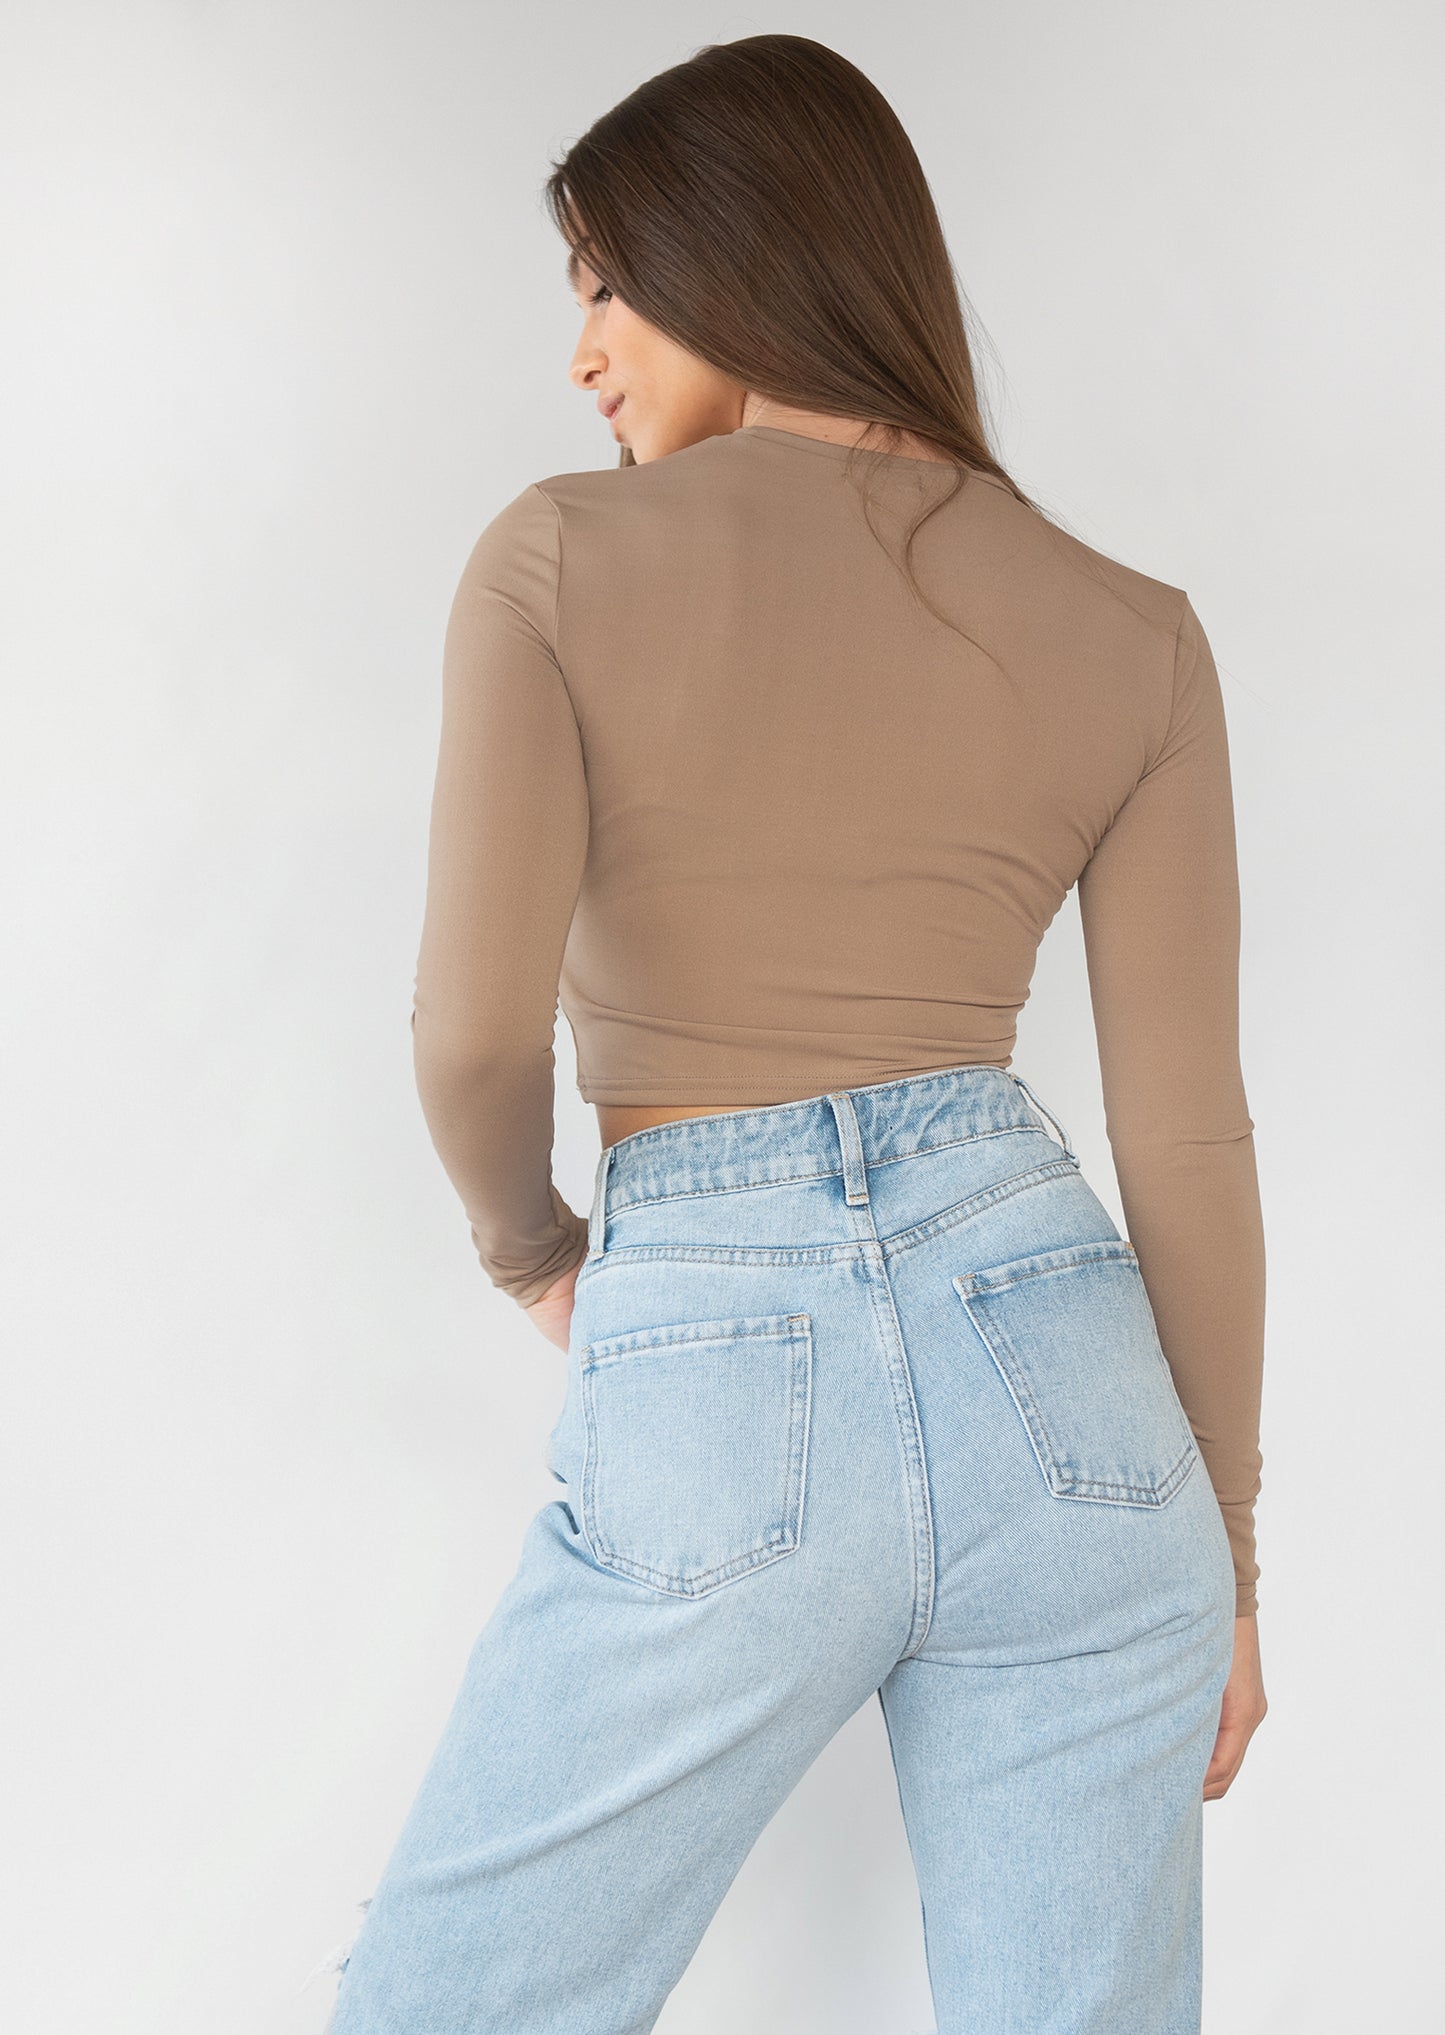 Long sleeve slim fit top in taupe